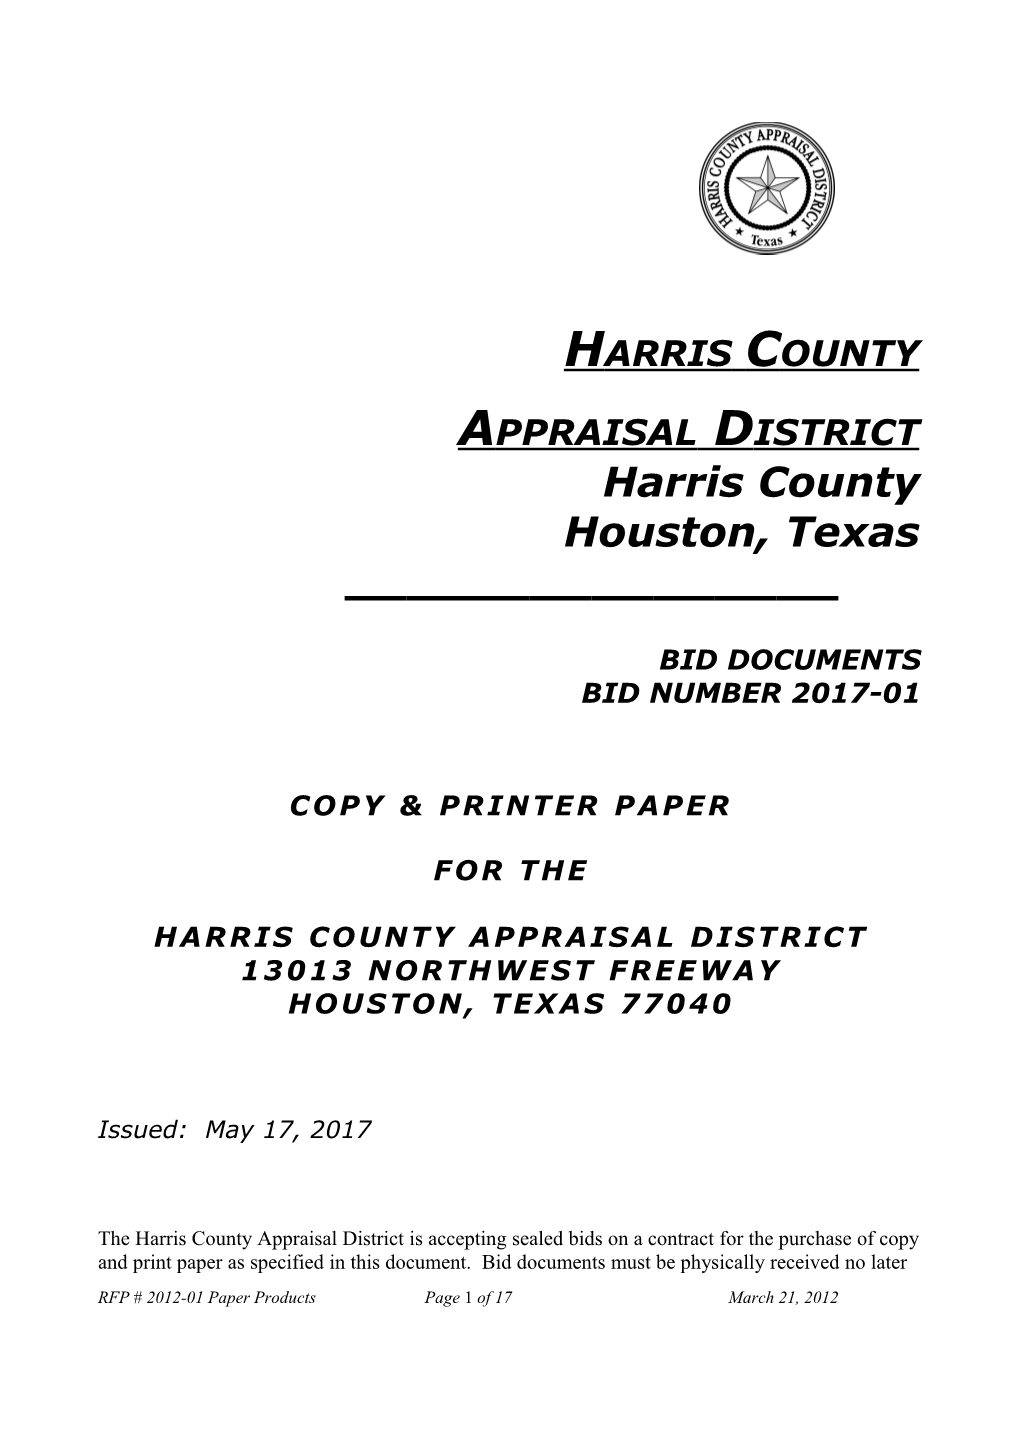 The Harris County Appraisal District Is Accepting Sealed Bids on a Contract for the Purchase